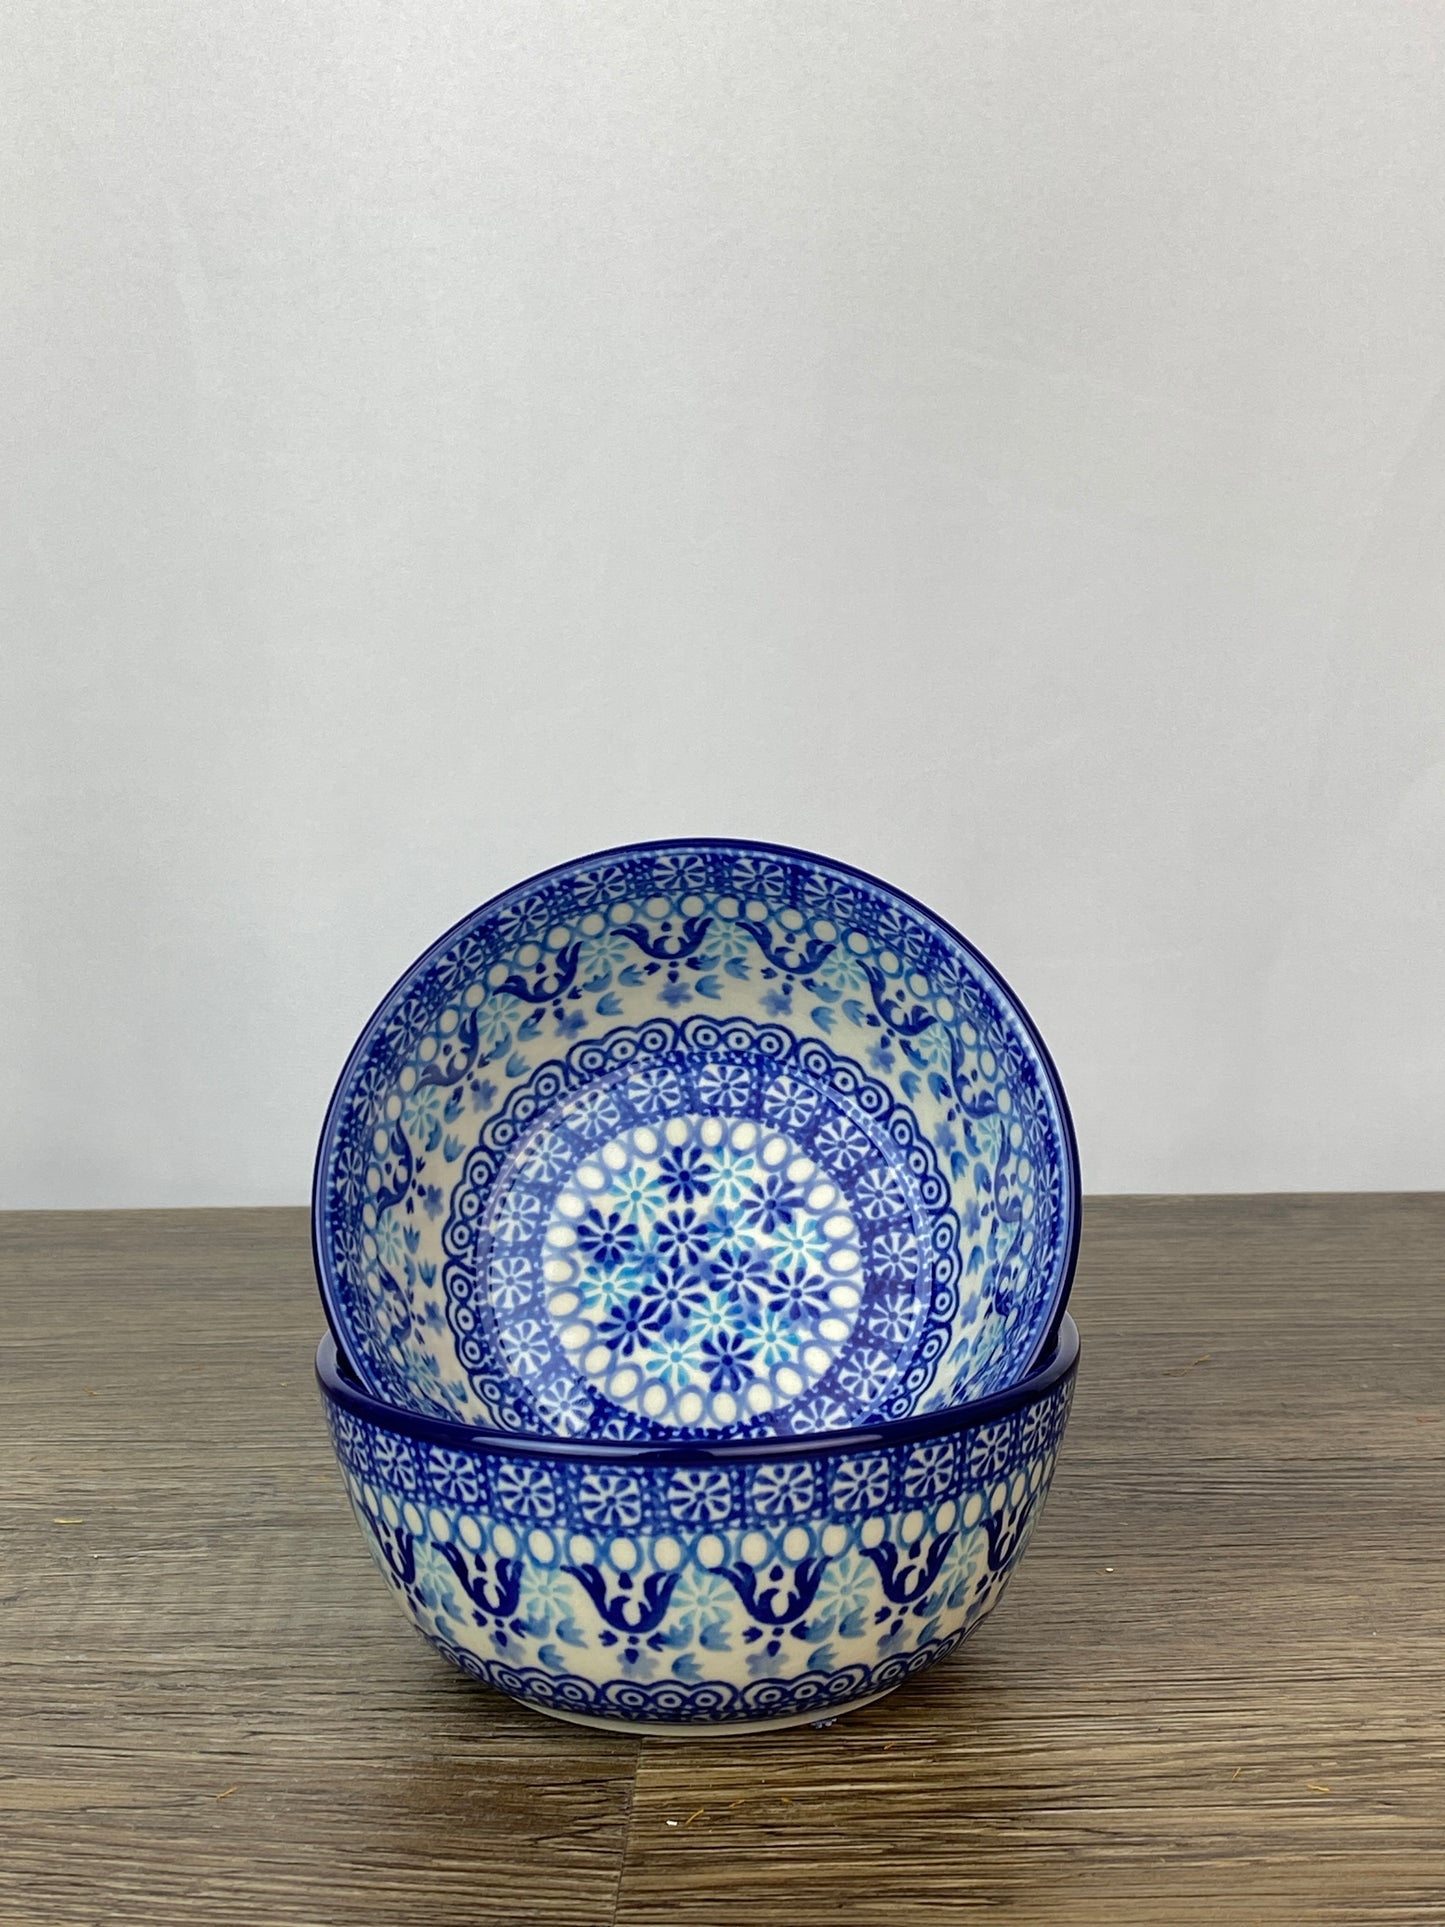 Small Cereal / Dessert Bowl - Shape 17 - Pattern 2185